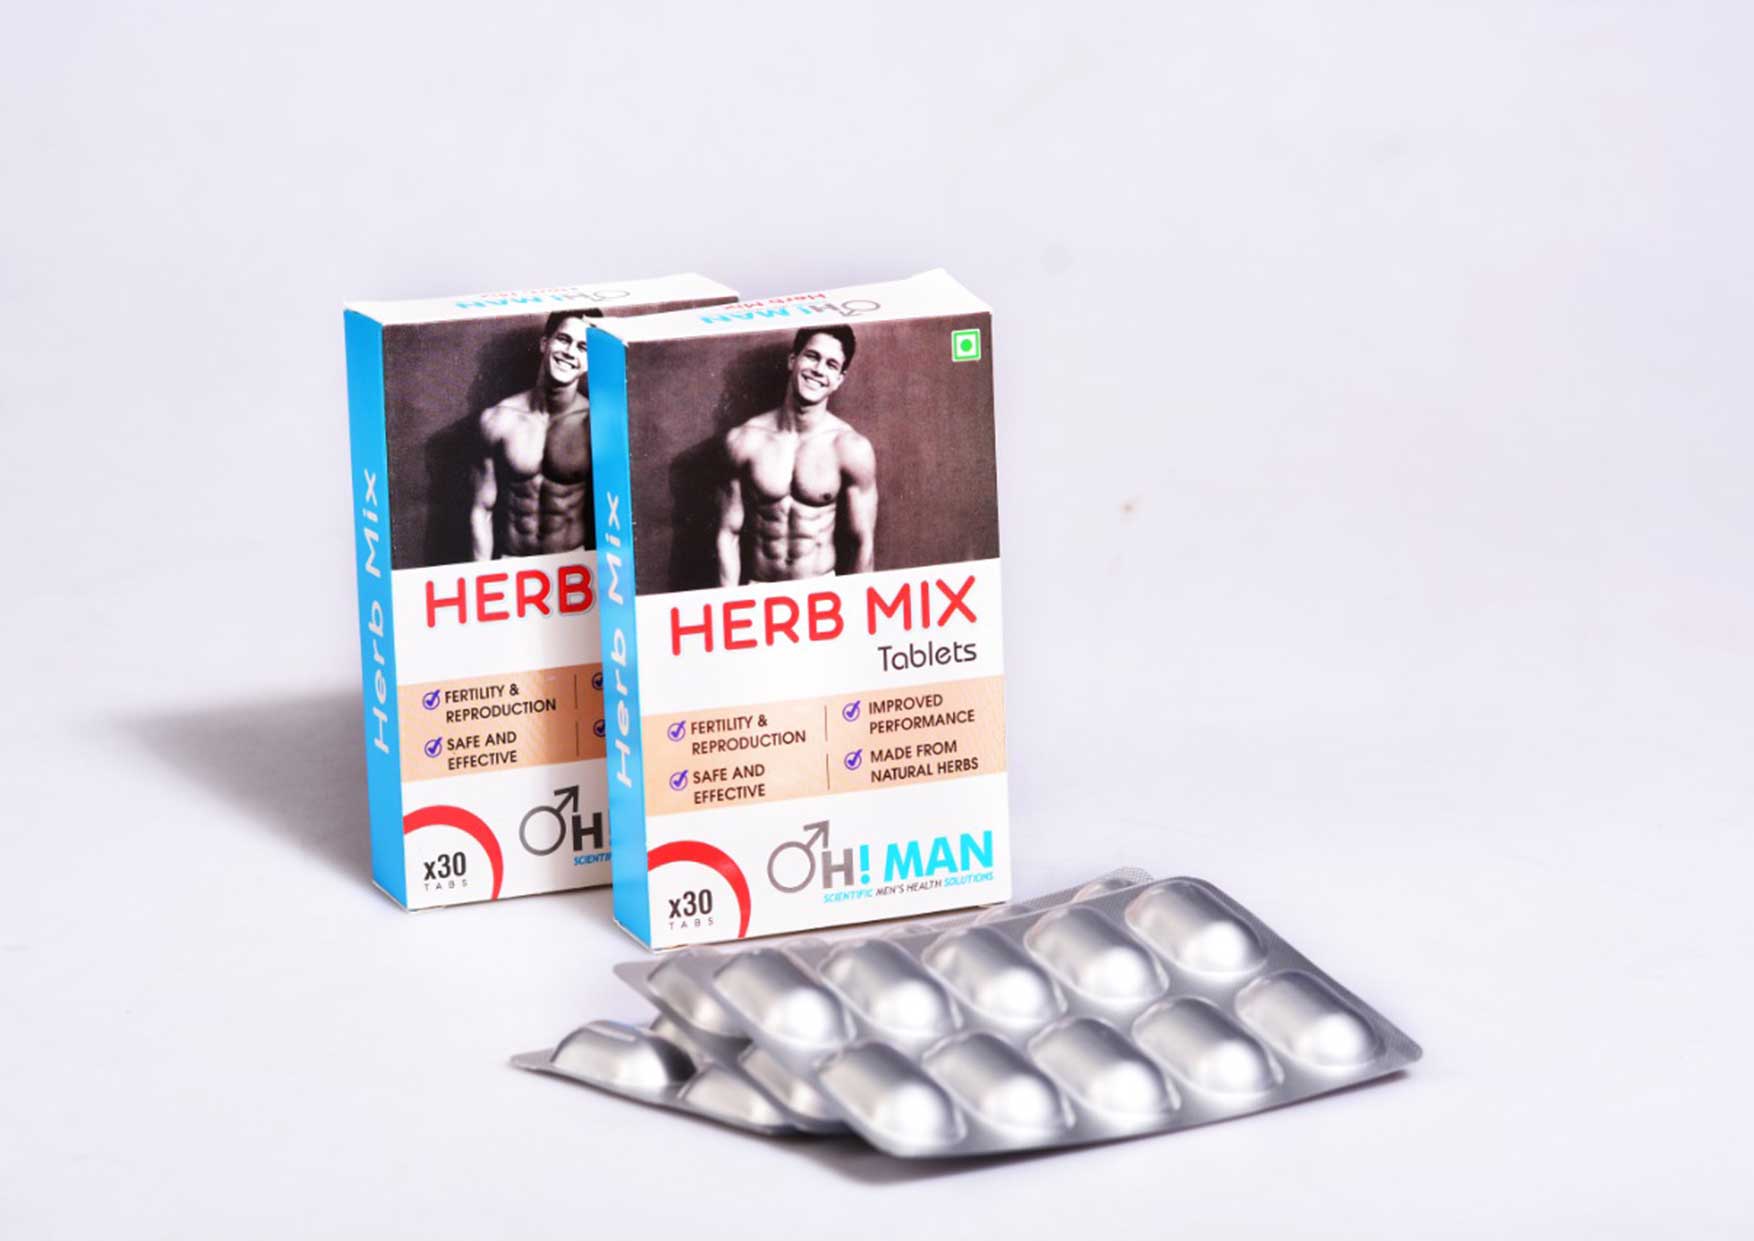 OH!MAN Herb Mix Tablet - OH!MAN